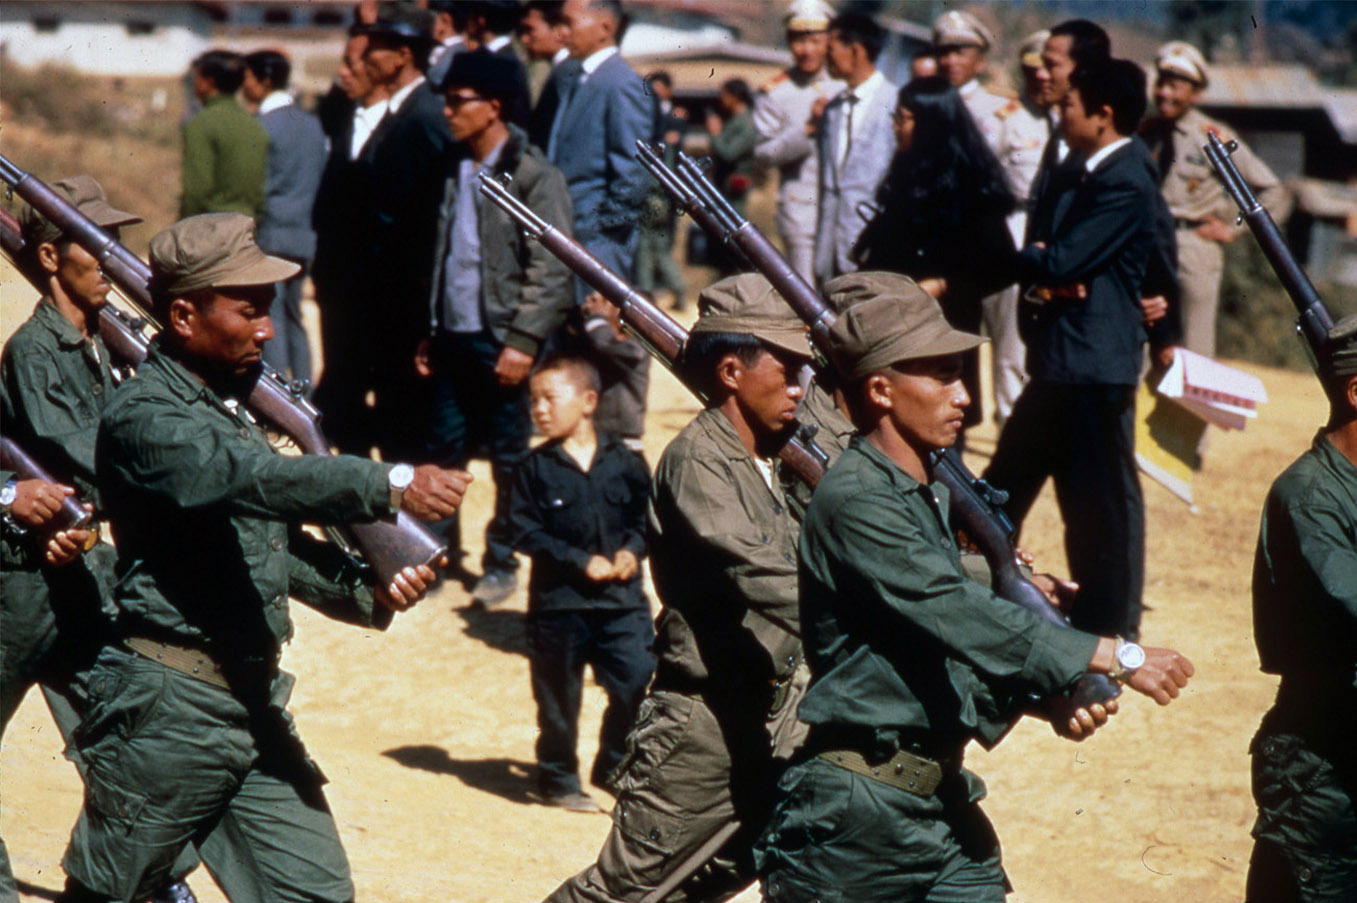 Hmong soldiers marching